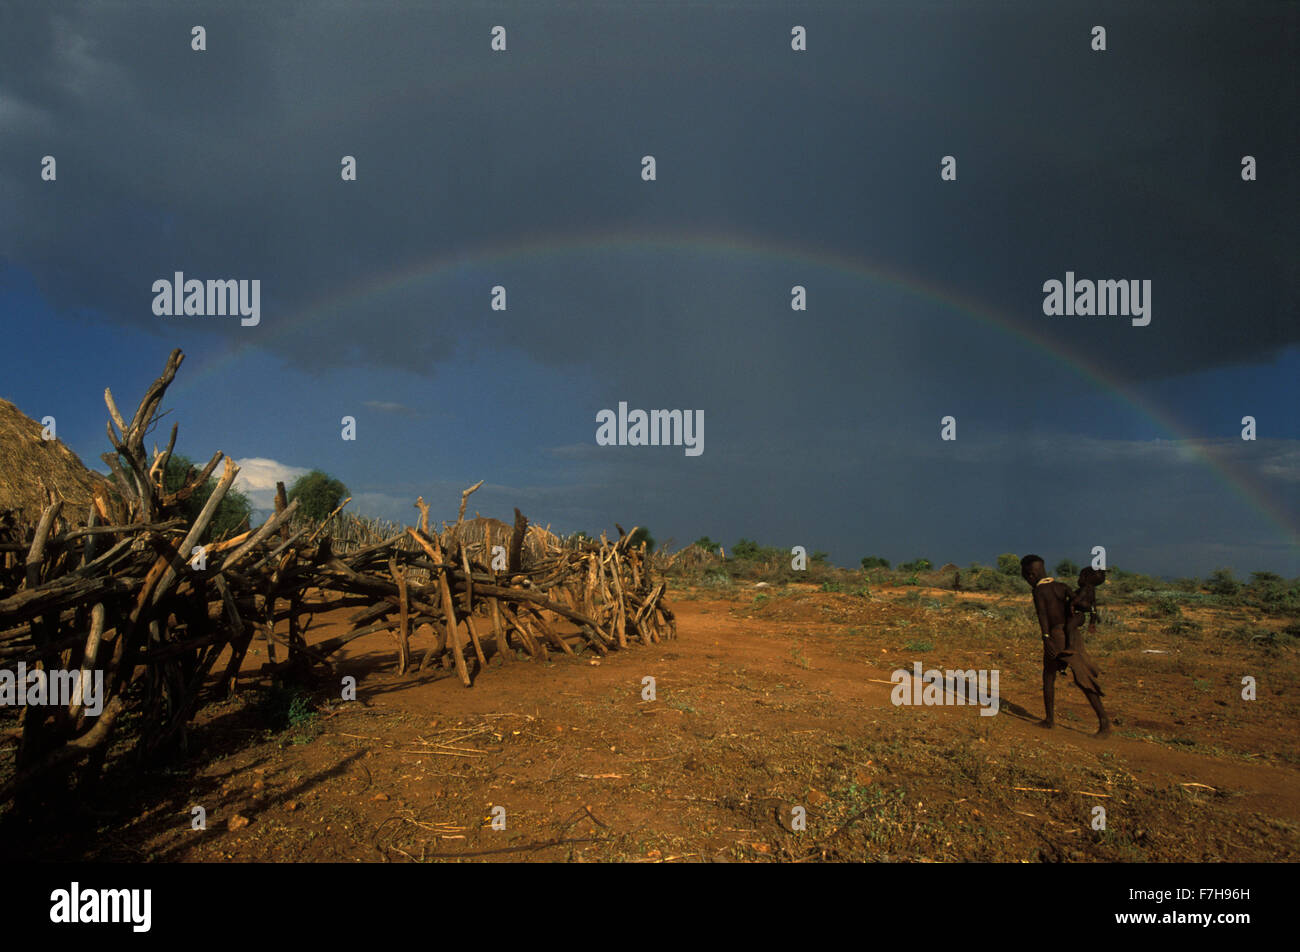 A double rainbow arches over a Hamar village and a Hamar girl who carries and infant on her hip, in South Omo, Ethiopia Stock Photo